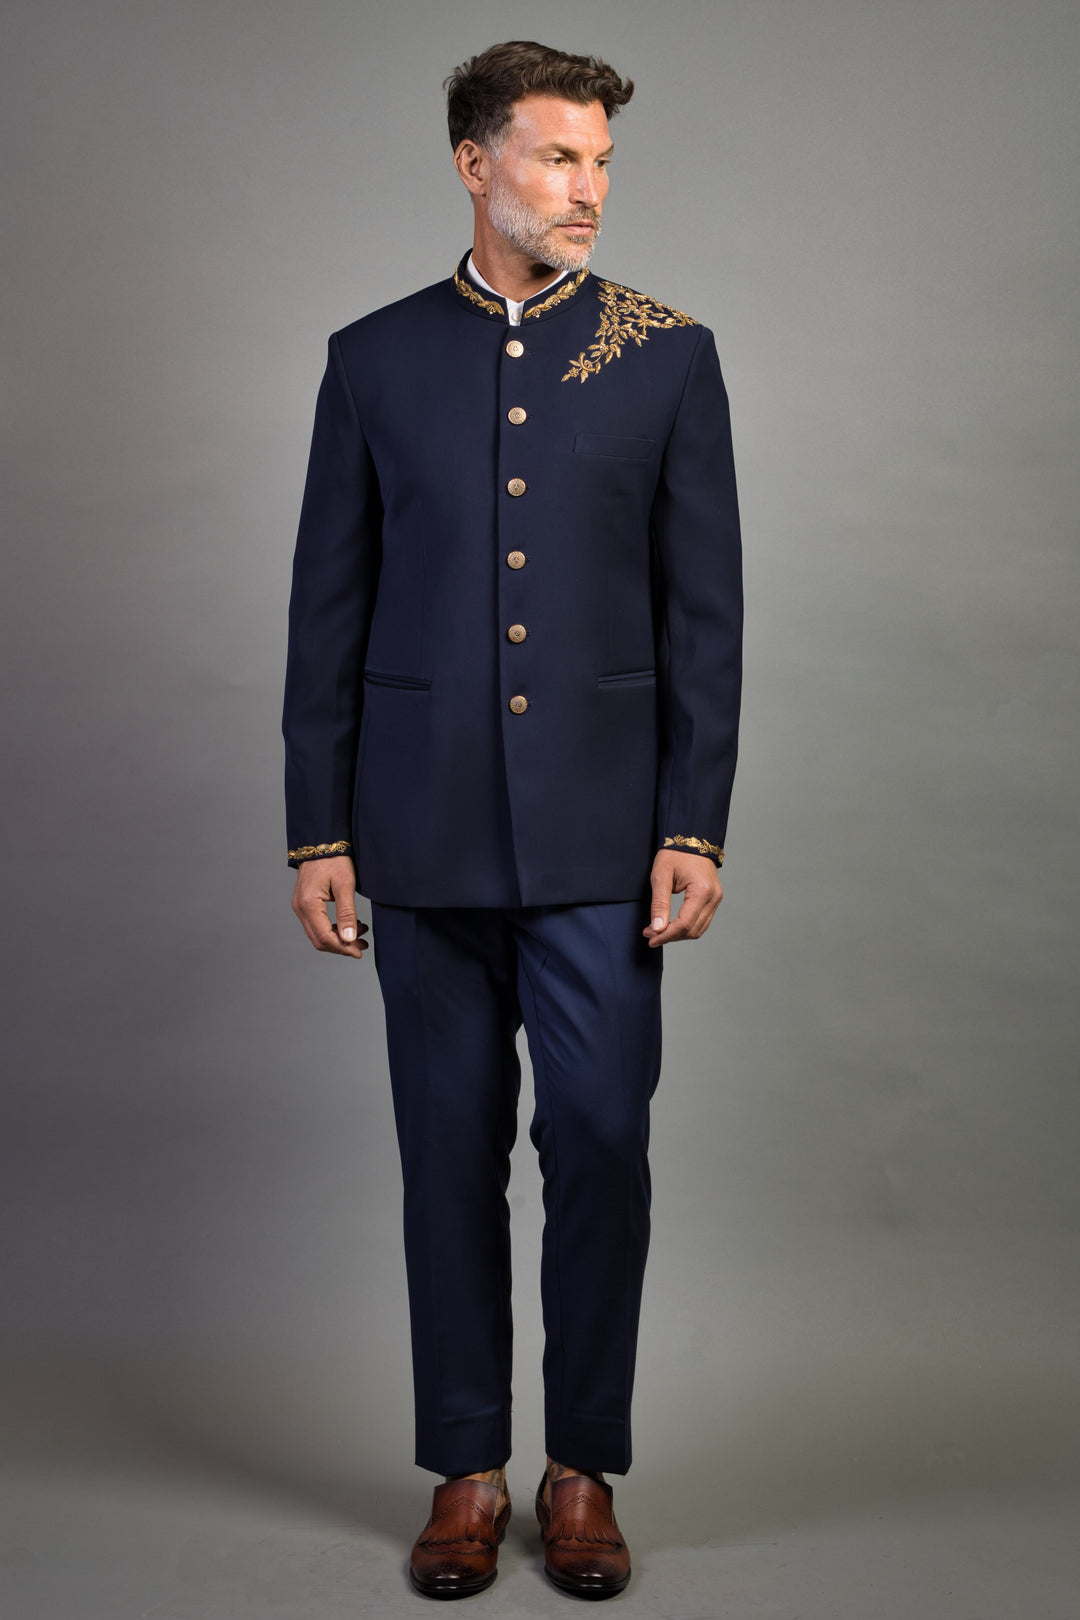 Navy Blue Bandhgala With Gold Embroidered